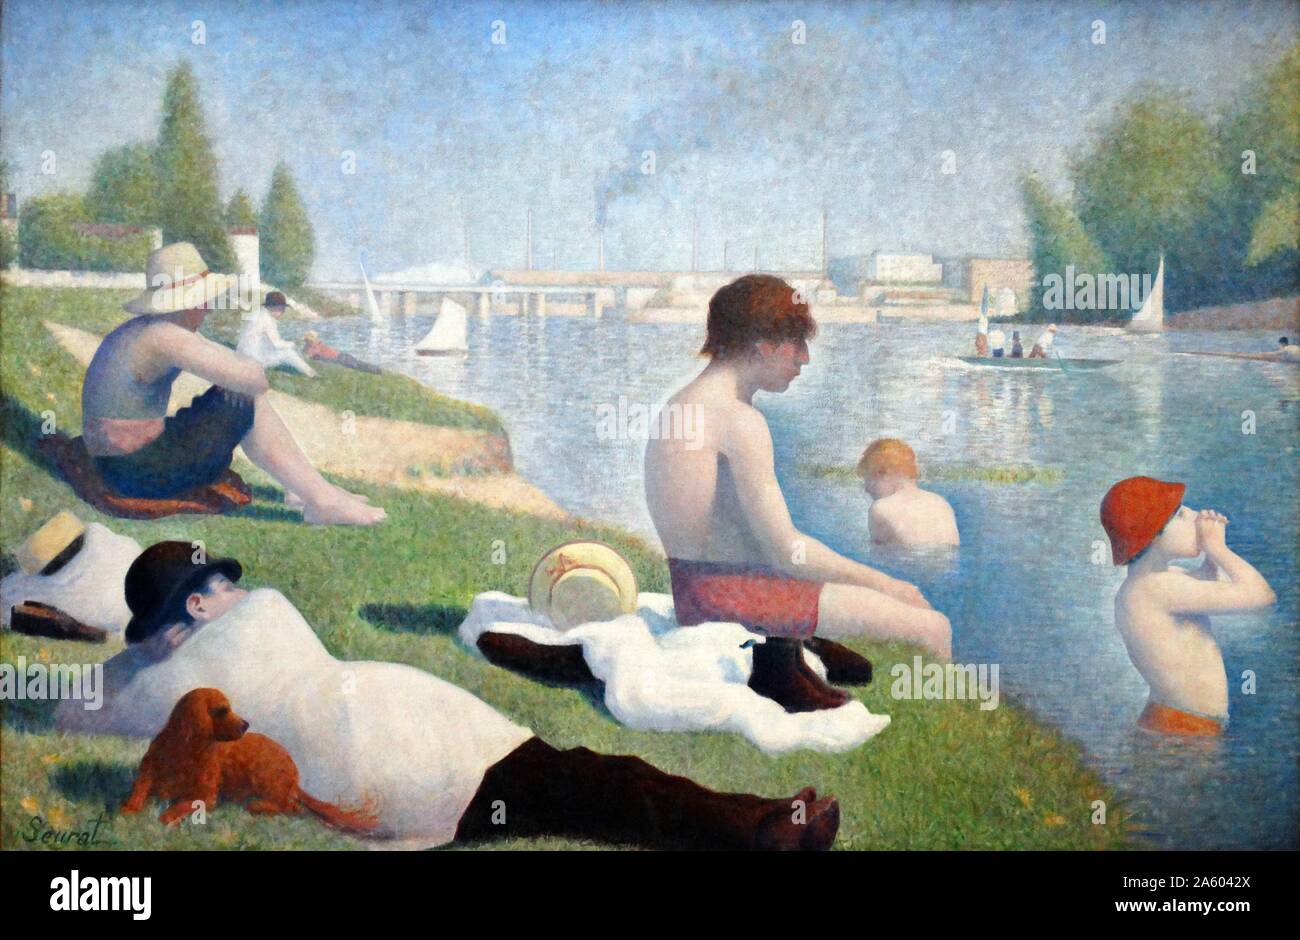 Painting titled 'Bathers at Asnières' by Georges-Pierre Seurat (1859-1891) a French post-Impressionist painter and draftsman. Dated 19th Century Stock Photo